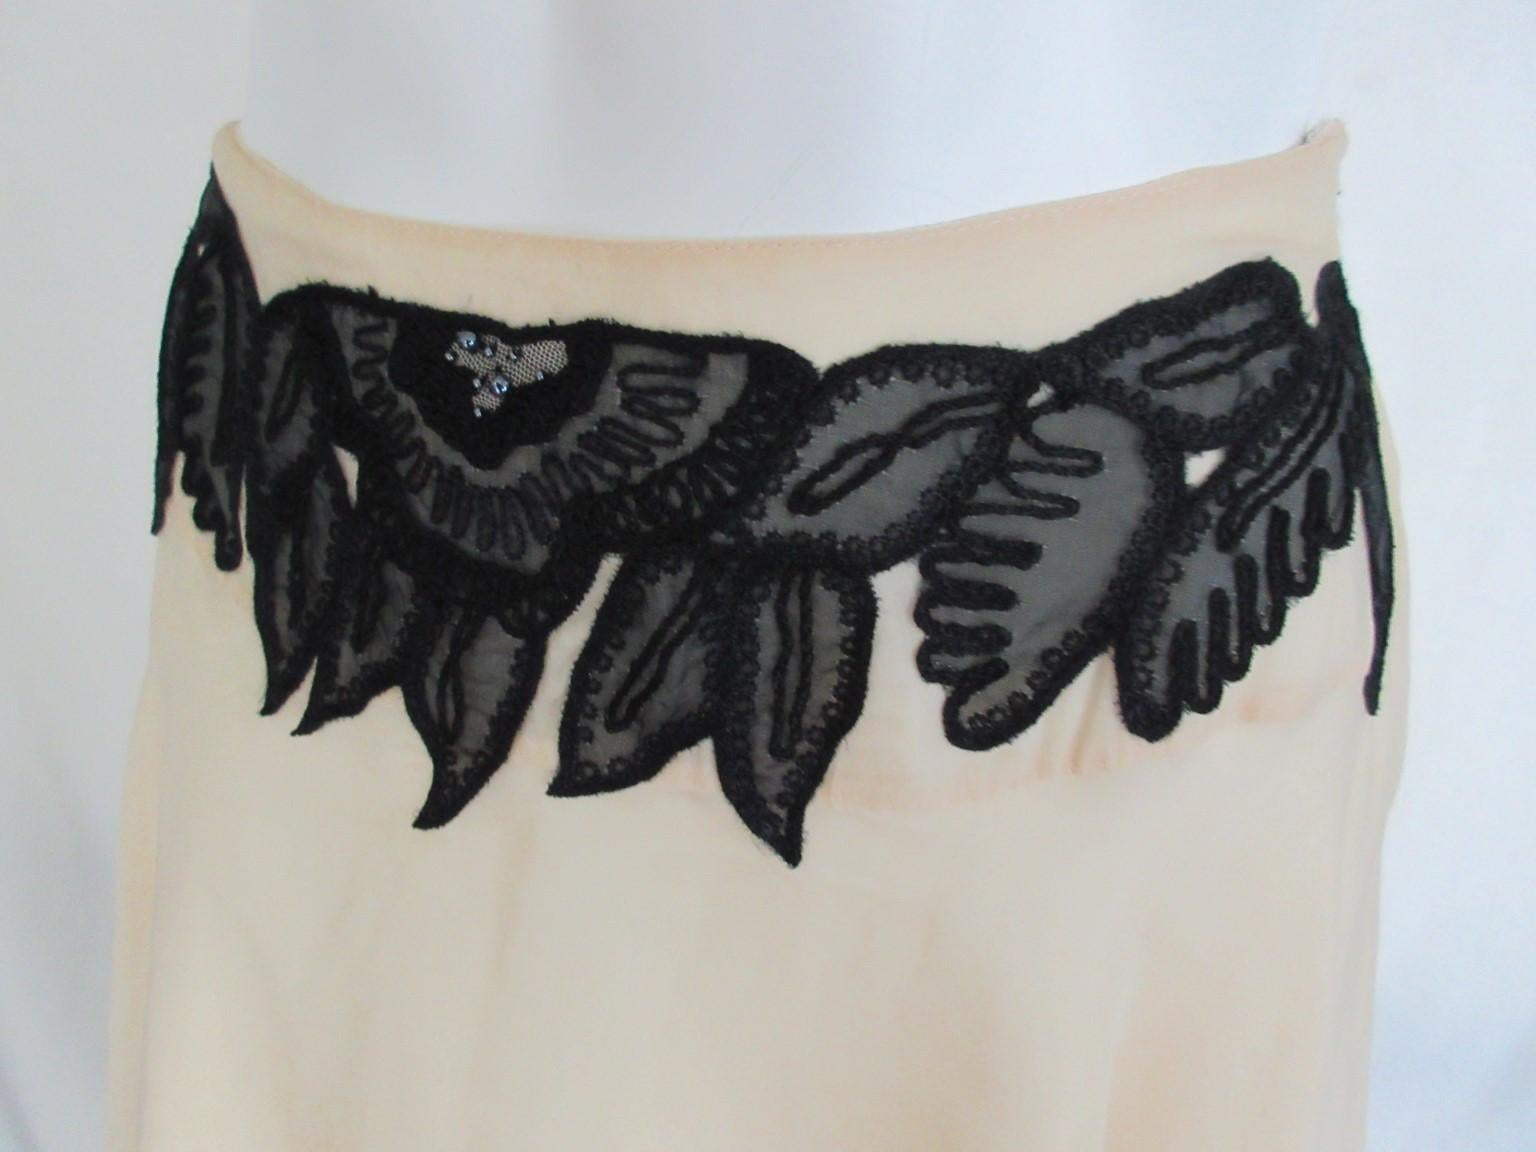 Beautiful Max Mara skirt with black lace flowers

We offer more exclusive vintage designer items, view our frontstore.

Details:
Side zipper
lined
100% silk
Sizes:
Size italian 42 / US 6 / GB 8 / France 38
Waist 74 cm/ 29.13 inch
Lenght 64 cm/ 25.19